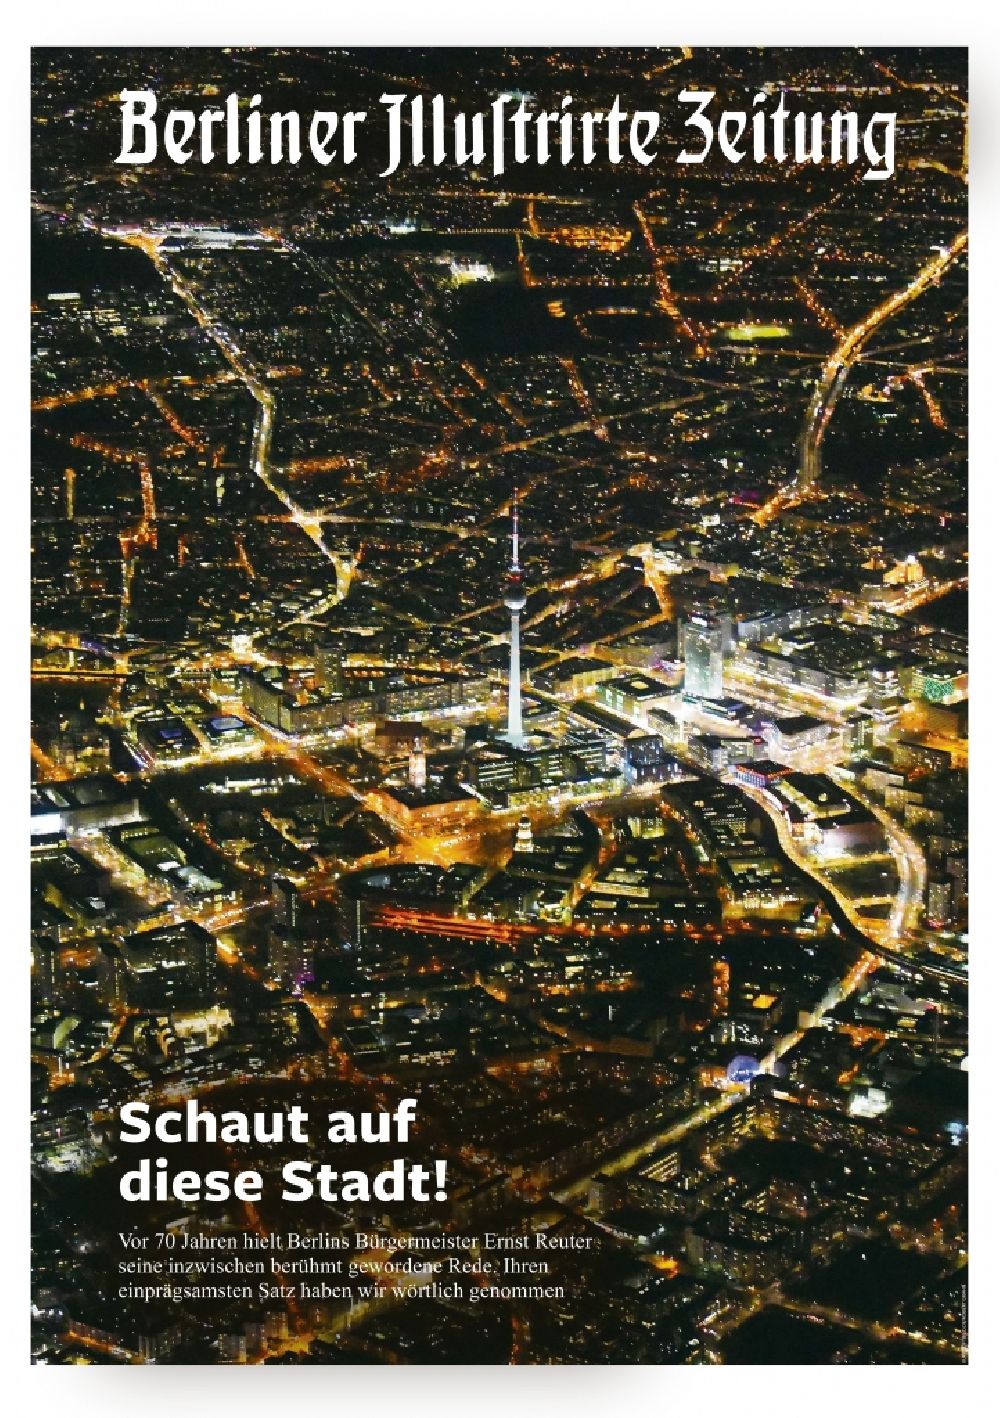 Berlin from the bird's eye view: Picture Section / media use of aerial use in the Newspaper - daily paper BERLINER ILLUSTRIERTE ZEITUNG / Morgenpost Titelfoto Seite 1, added to in Berlin, Germany